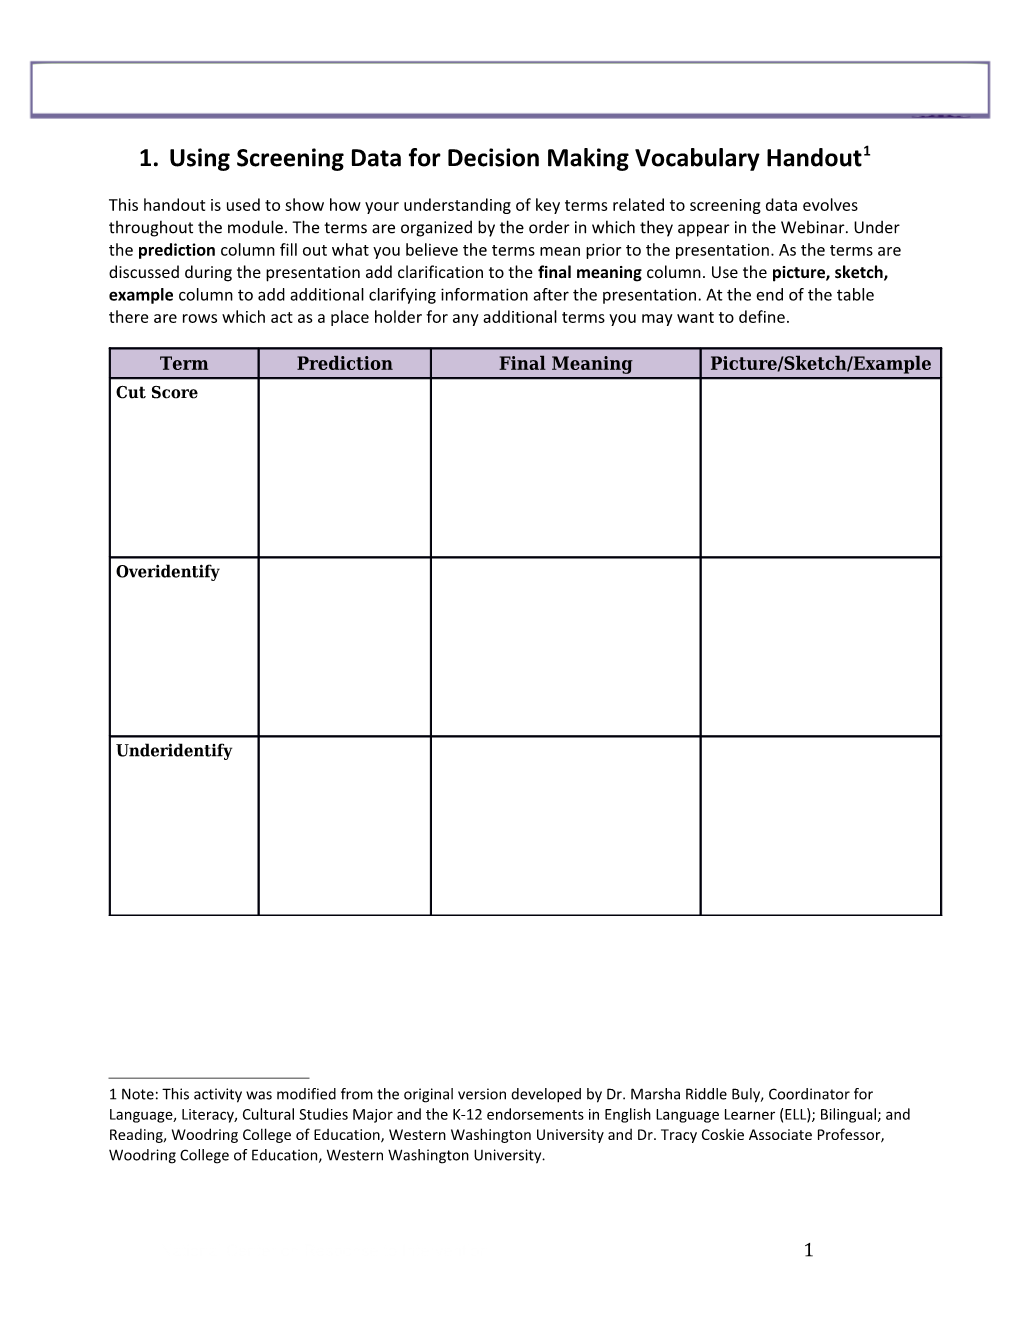 Using Curriculum Based Measurement to Determine Response to Intervention